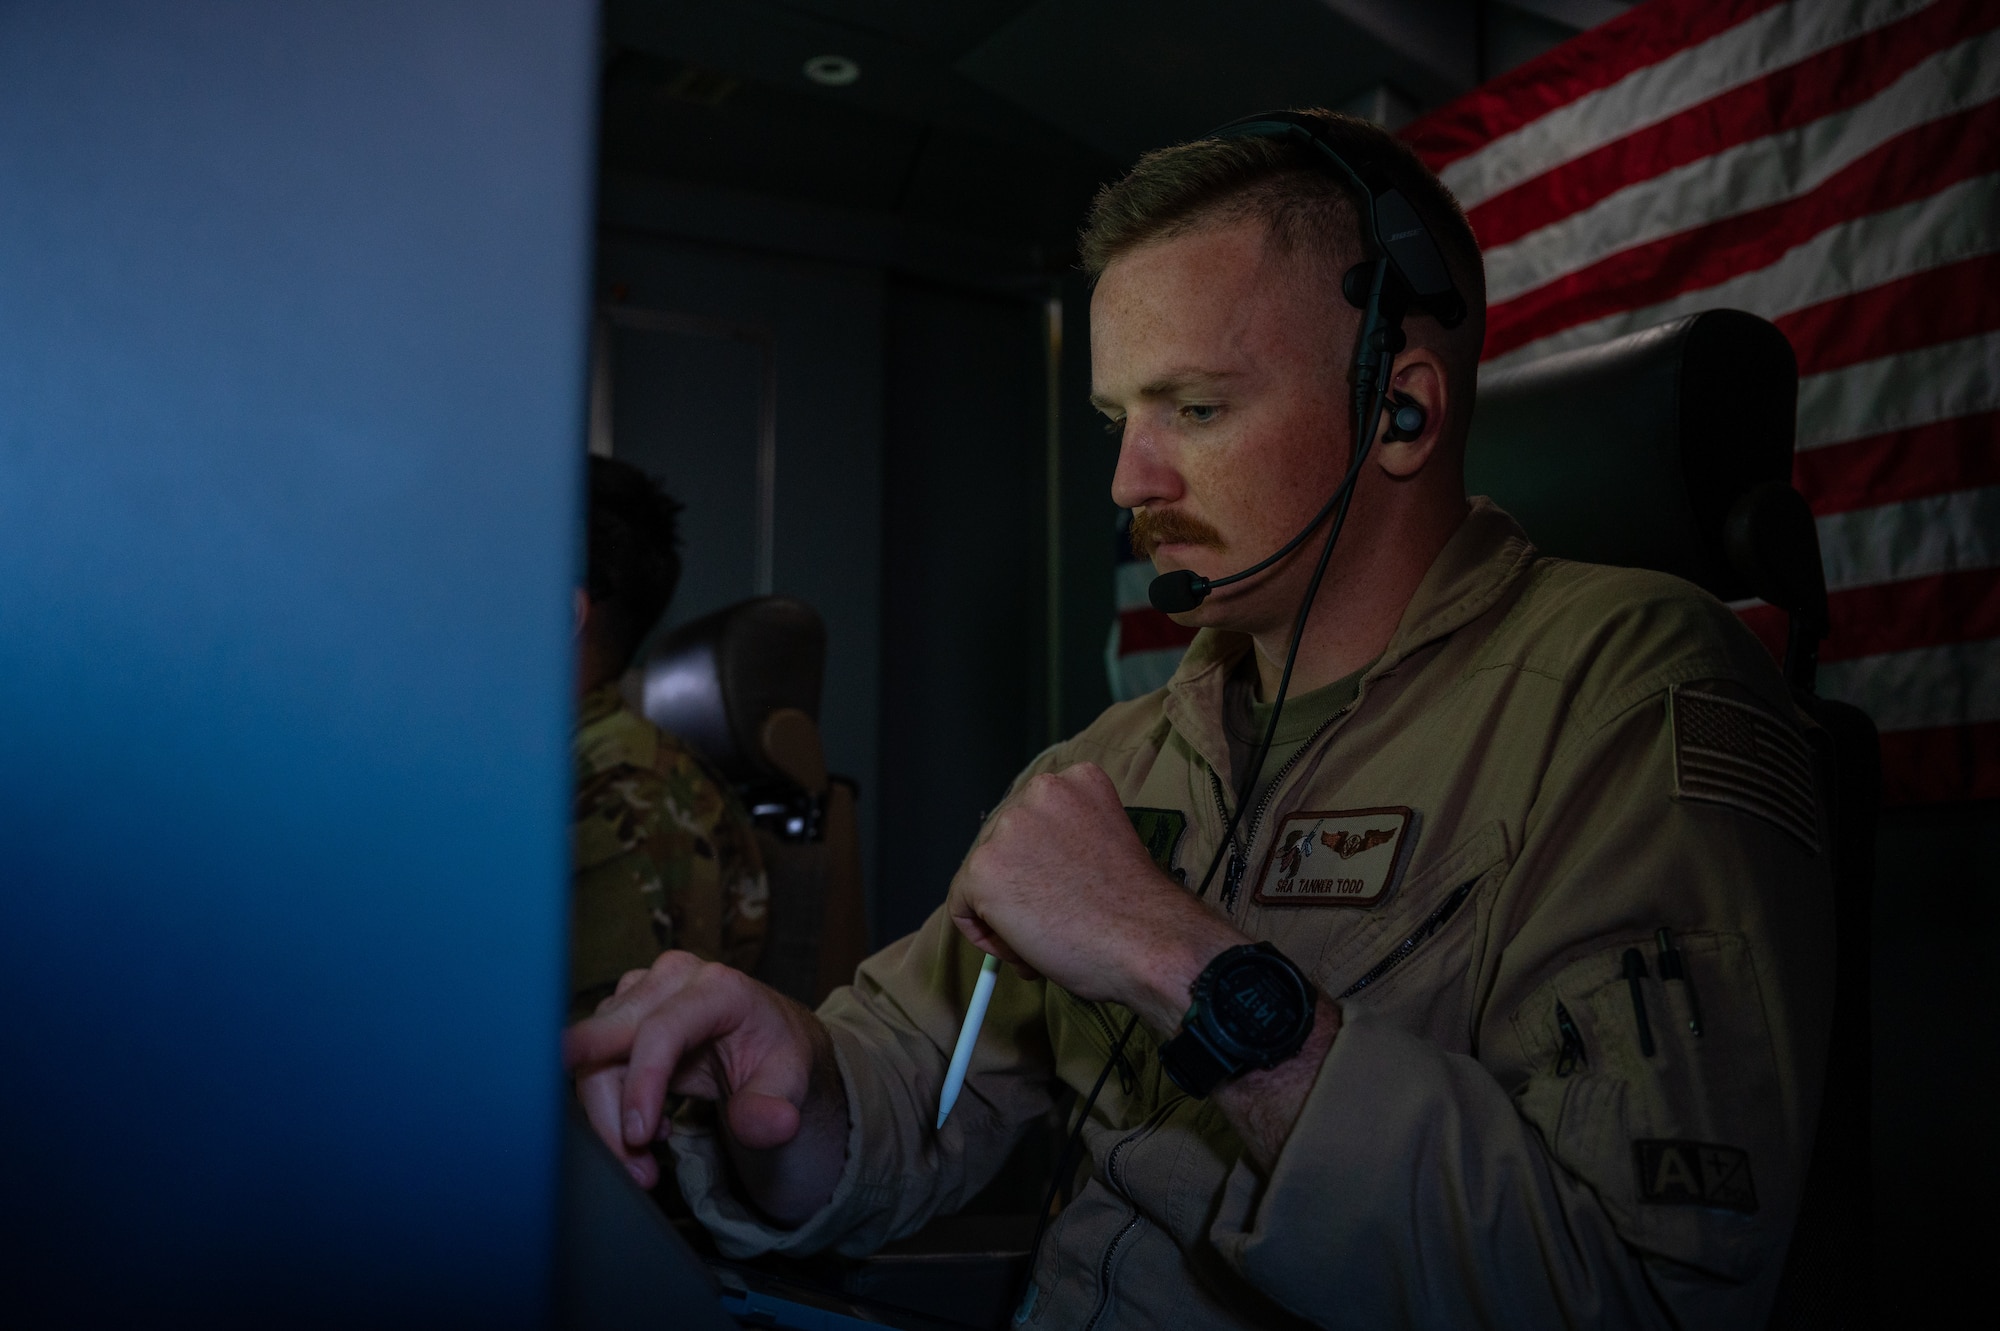 U.S. Air Force Senior Airman Tanner Todd, 349th Air Refueling Squadron boom operator, prepares to refuel a F-15E Strike Eagle assigned to the 335th Expeditionary Fighter Squadron during Air Mobility Command’s Employment Concept Exercise 22-08 Aug. 29, 2022, in the U.S. Central Command area of responsibility.